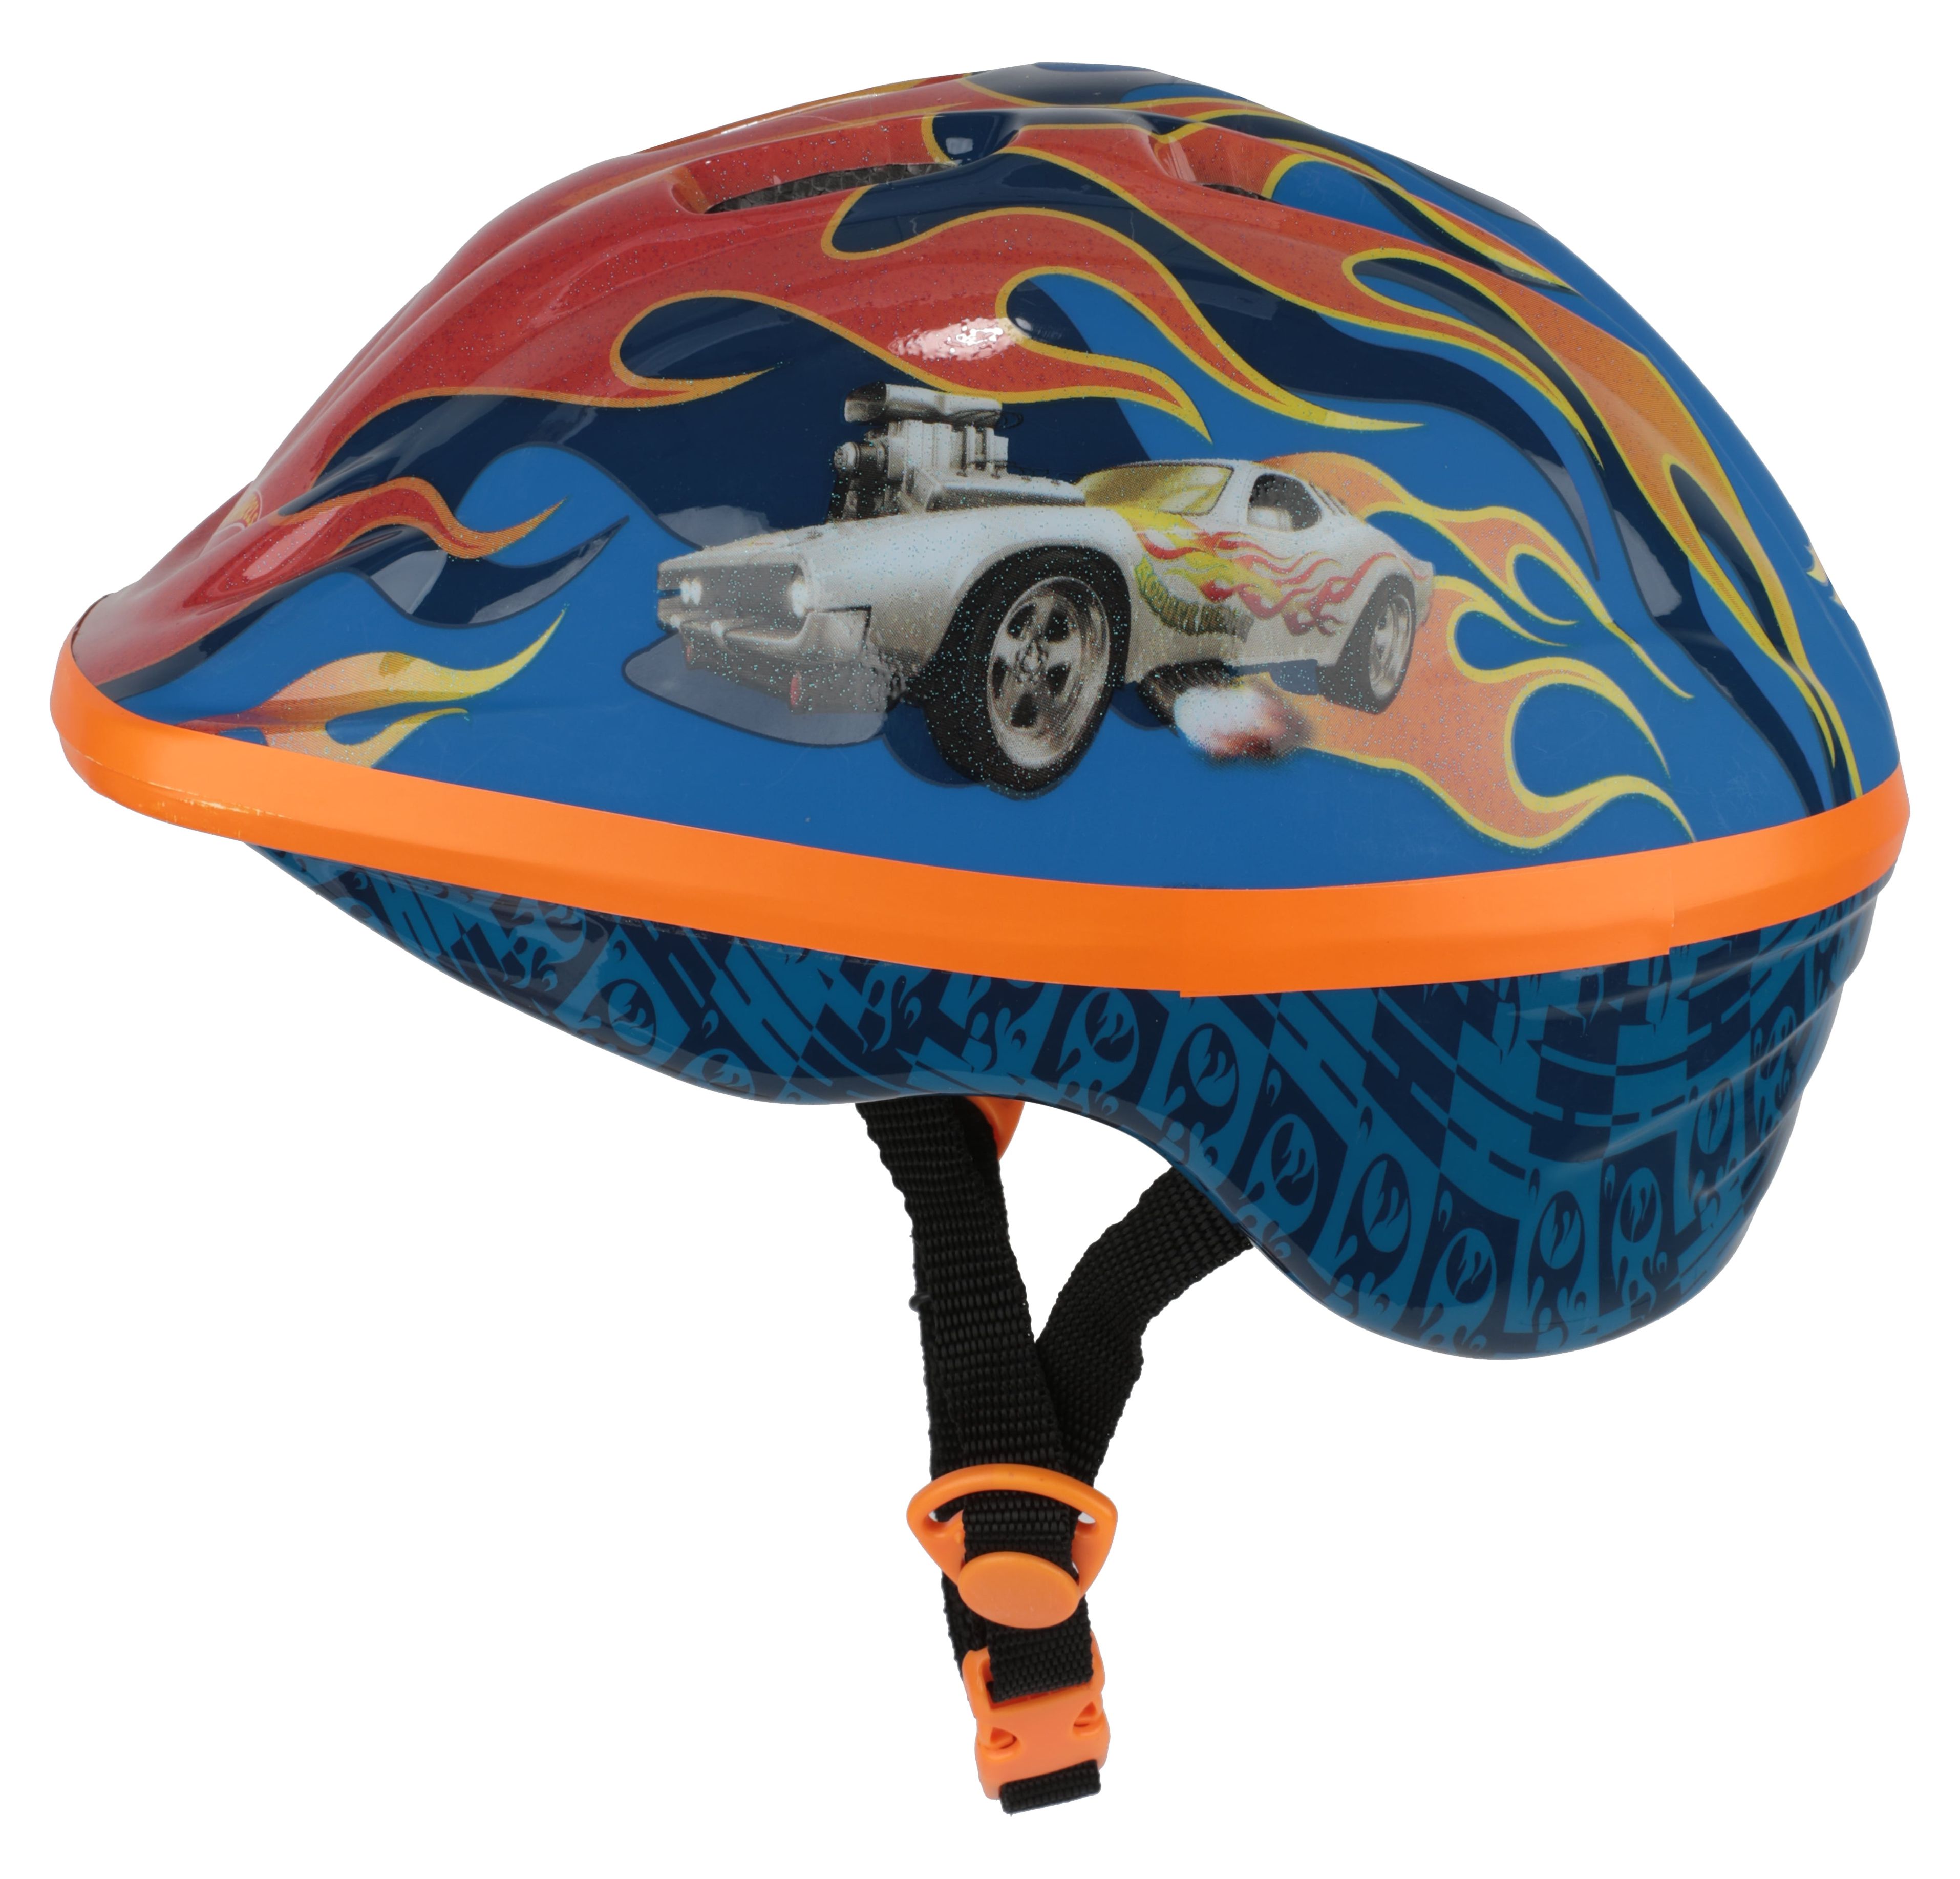 Hot Wheels Helmet with Surprise Bonus Car for Bikes, Skateboards and Scooters, Ages 5+ - image 3 of 10